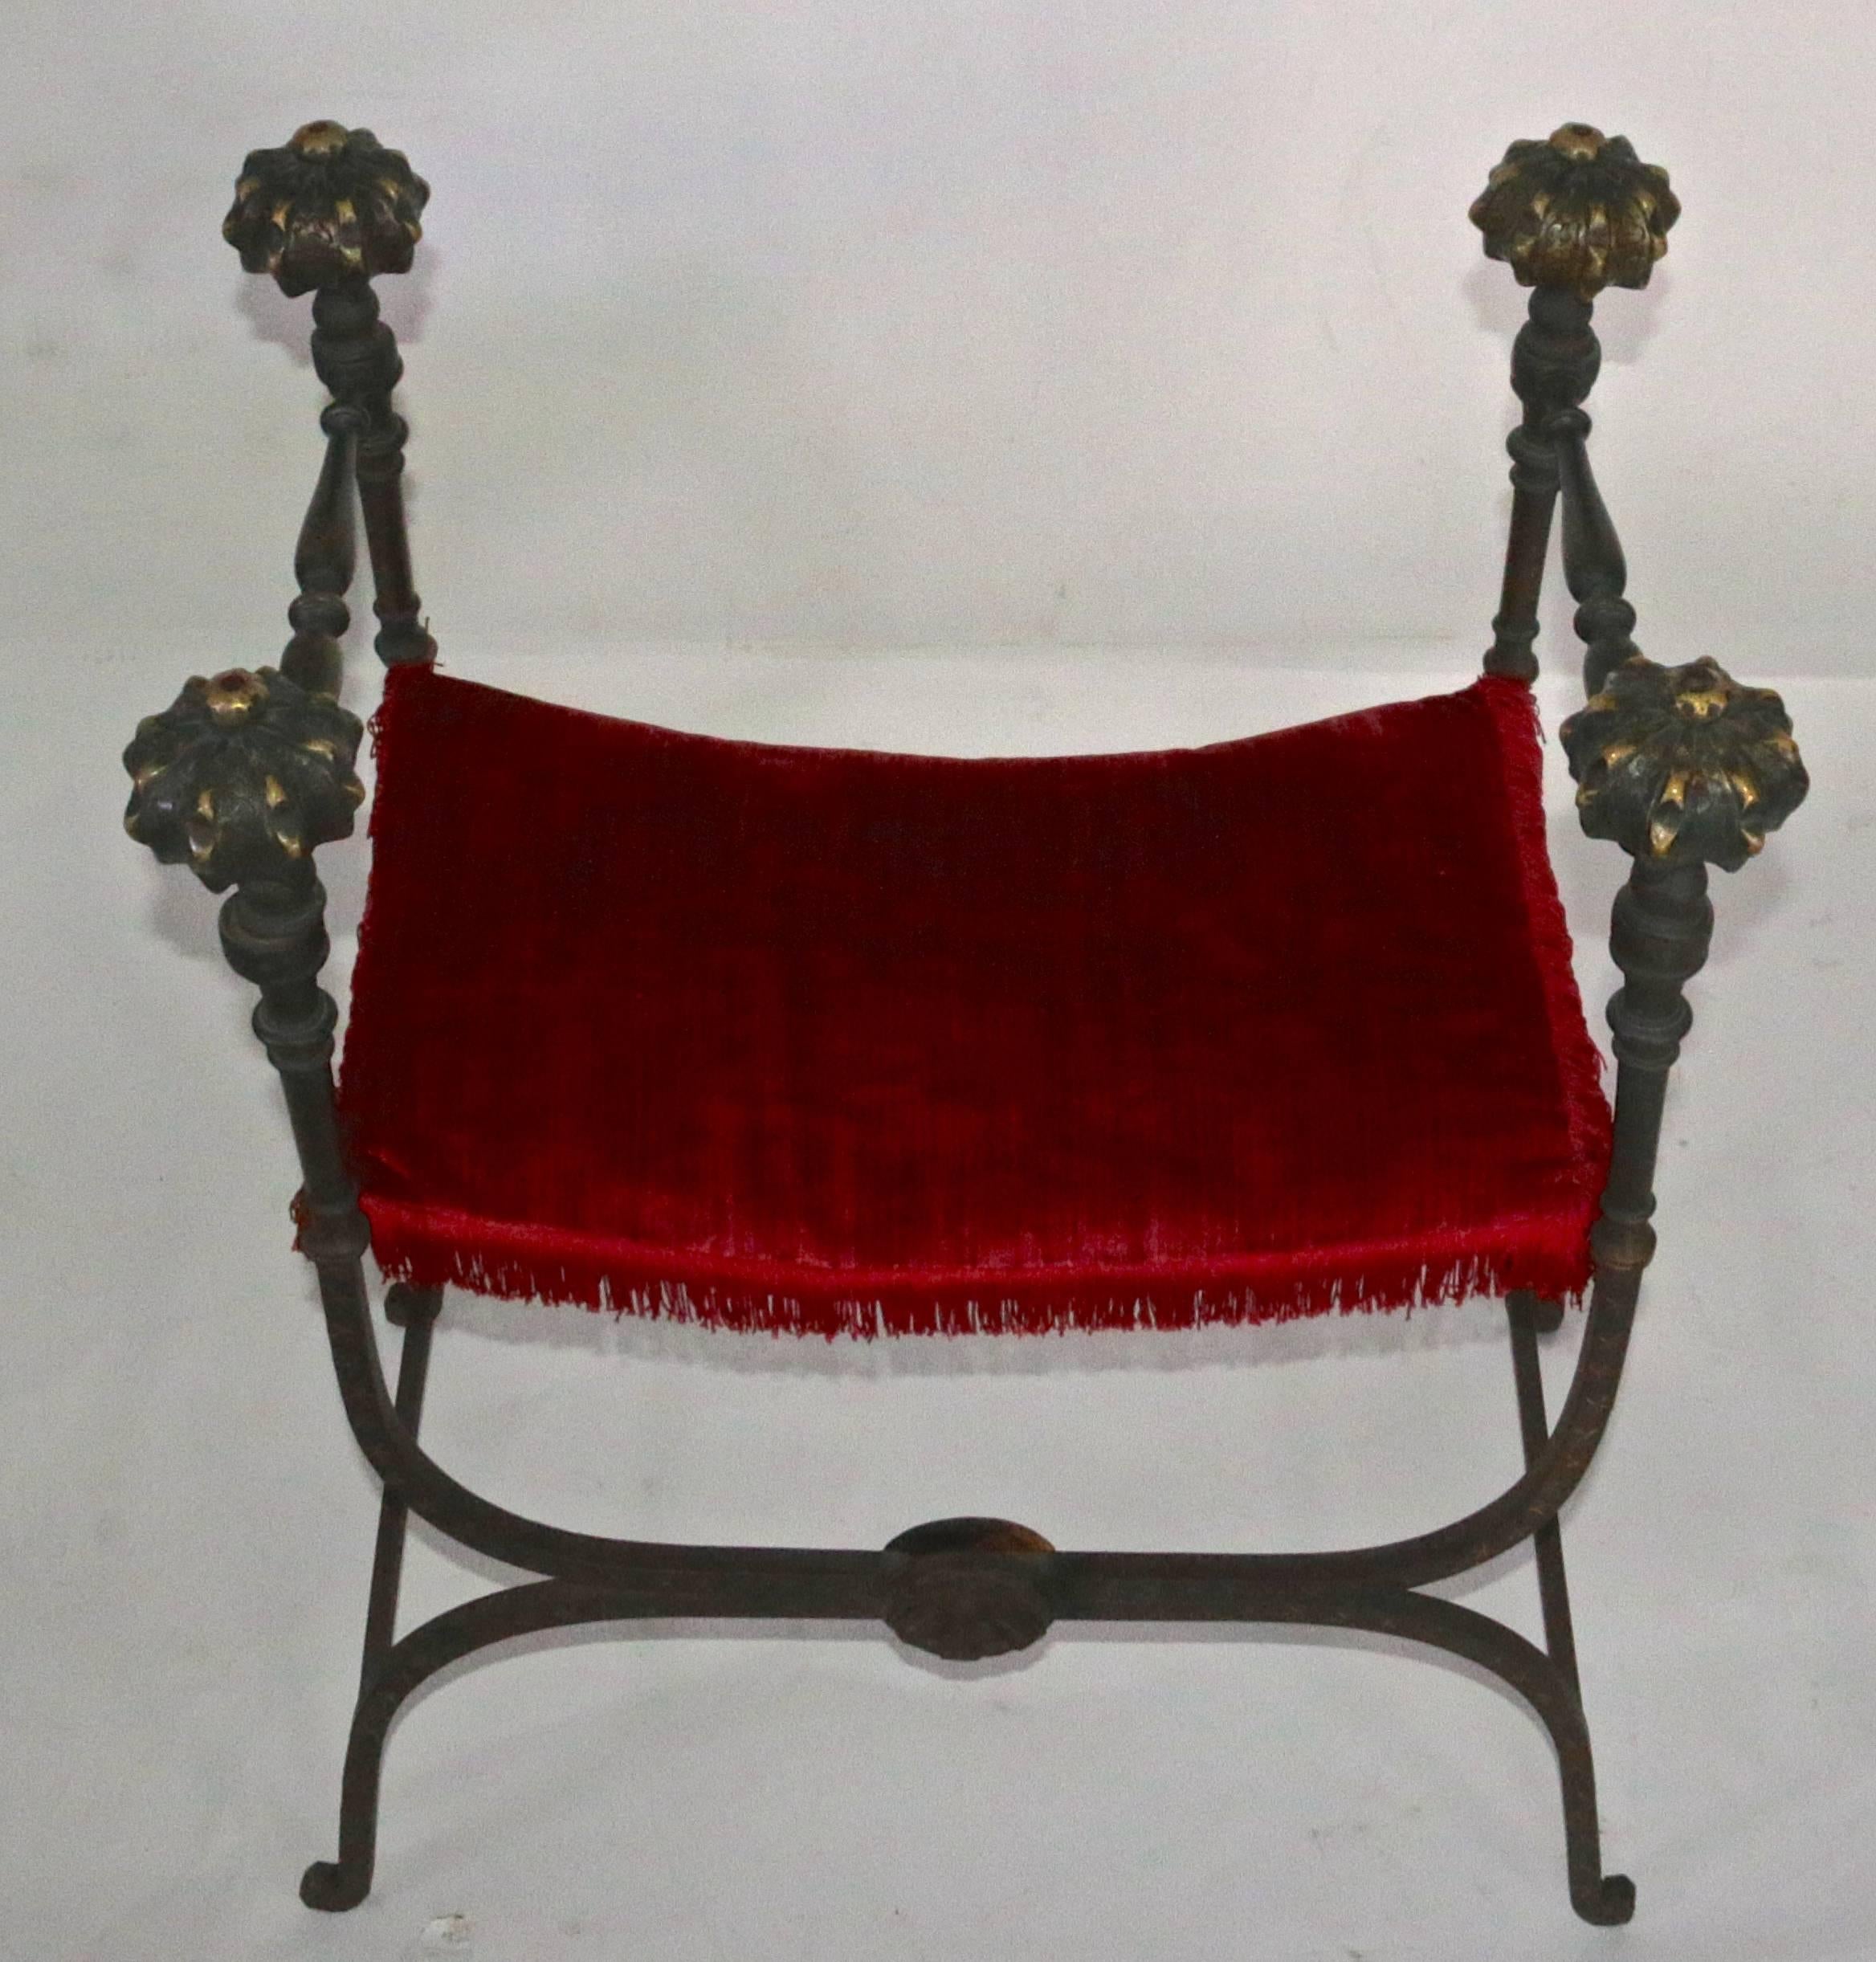 19th century large Savonarola Faldistorio style bench made of iron and brass in excellent used condition.